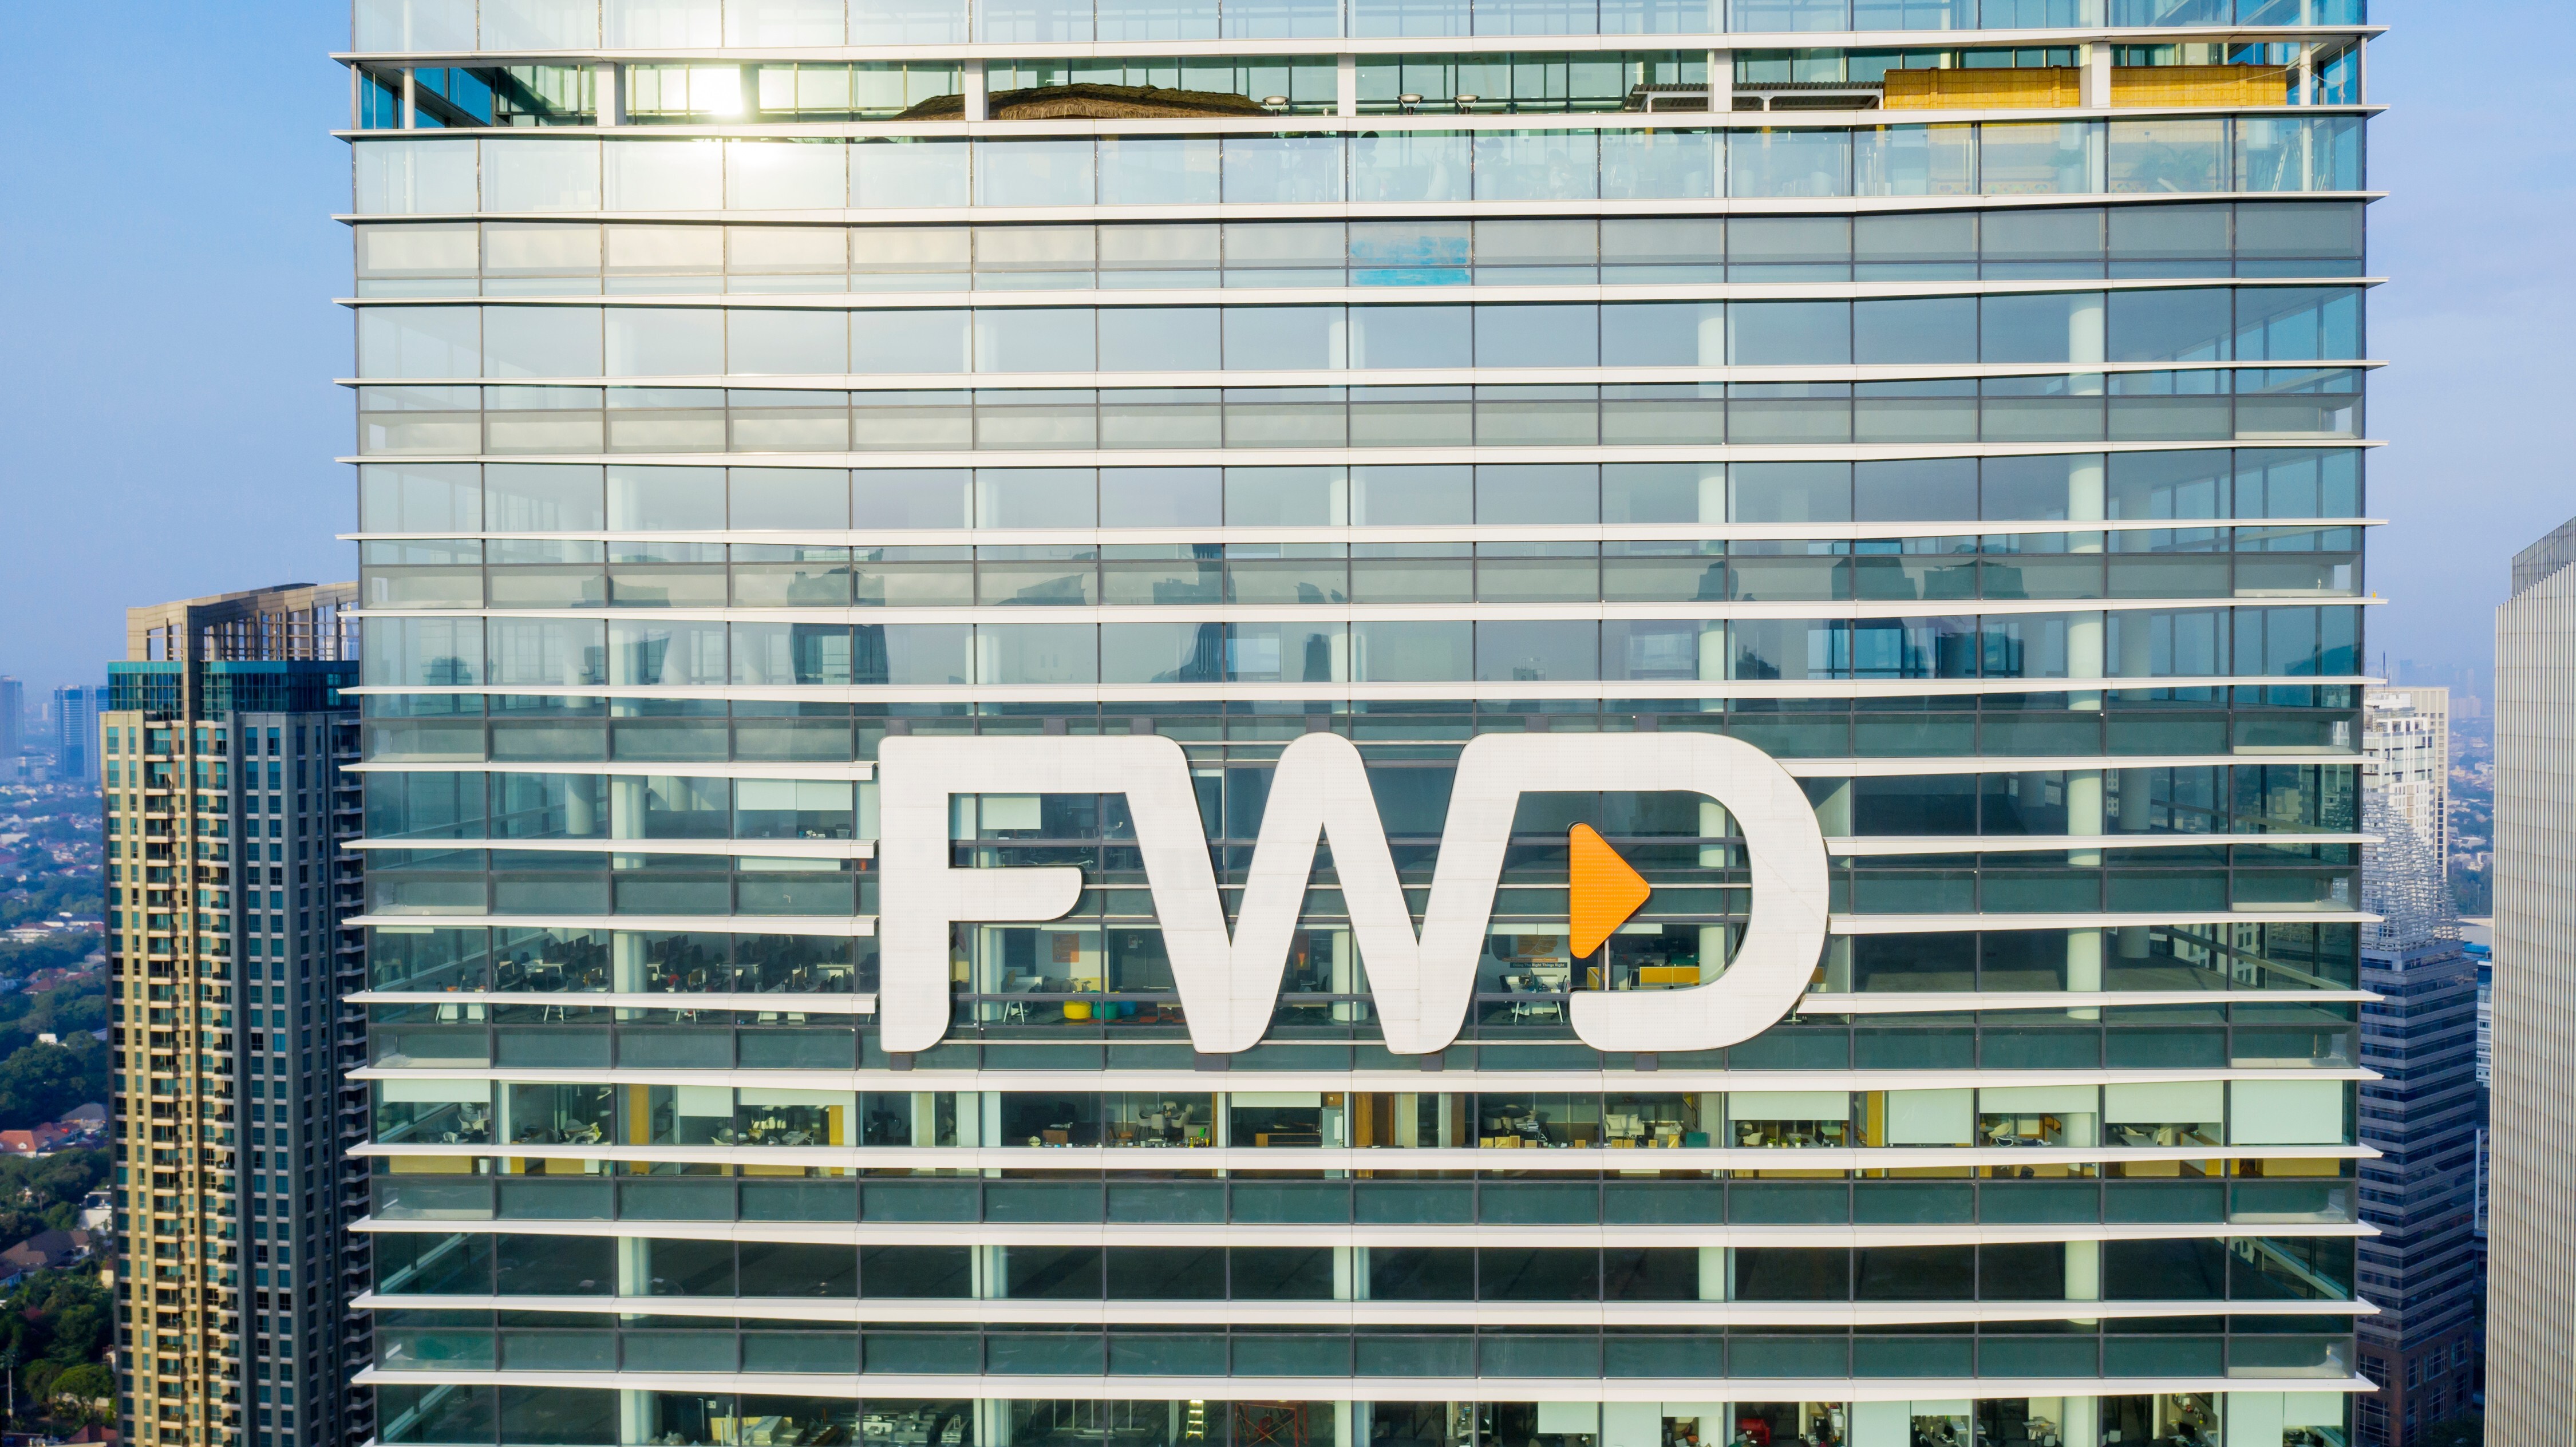 A view of the FWD Tower in South Jakarta, Indonesia. Photo: Shutterstock